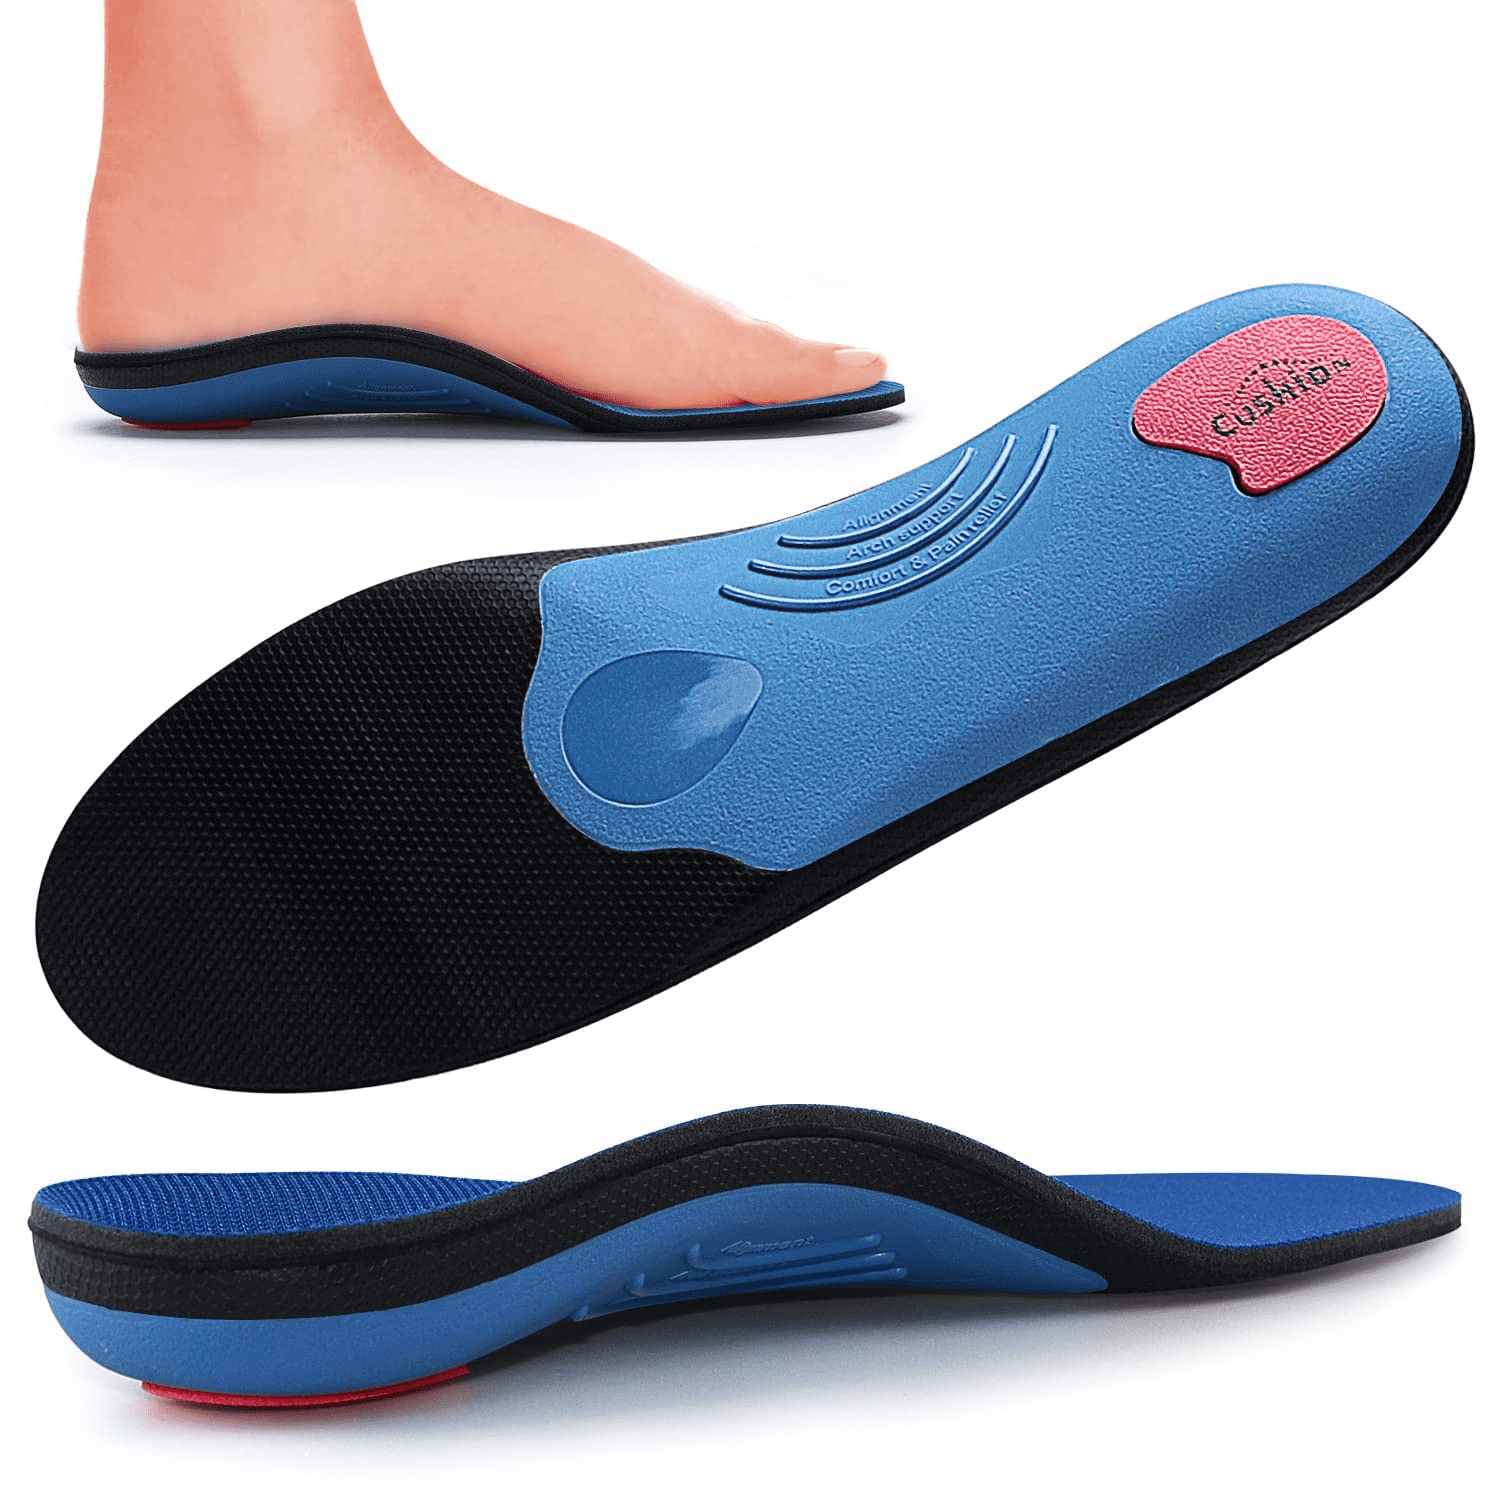 Full length Orthotic Insoles Orthopedic Functional Foam Pads for Women&Men Superior Cushioning Shoe Inserts for Relief Flat Feet 